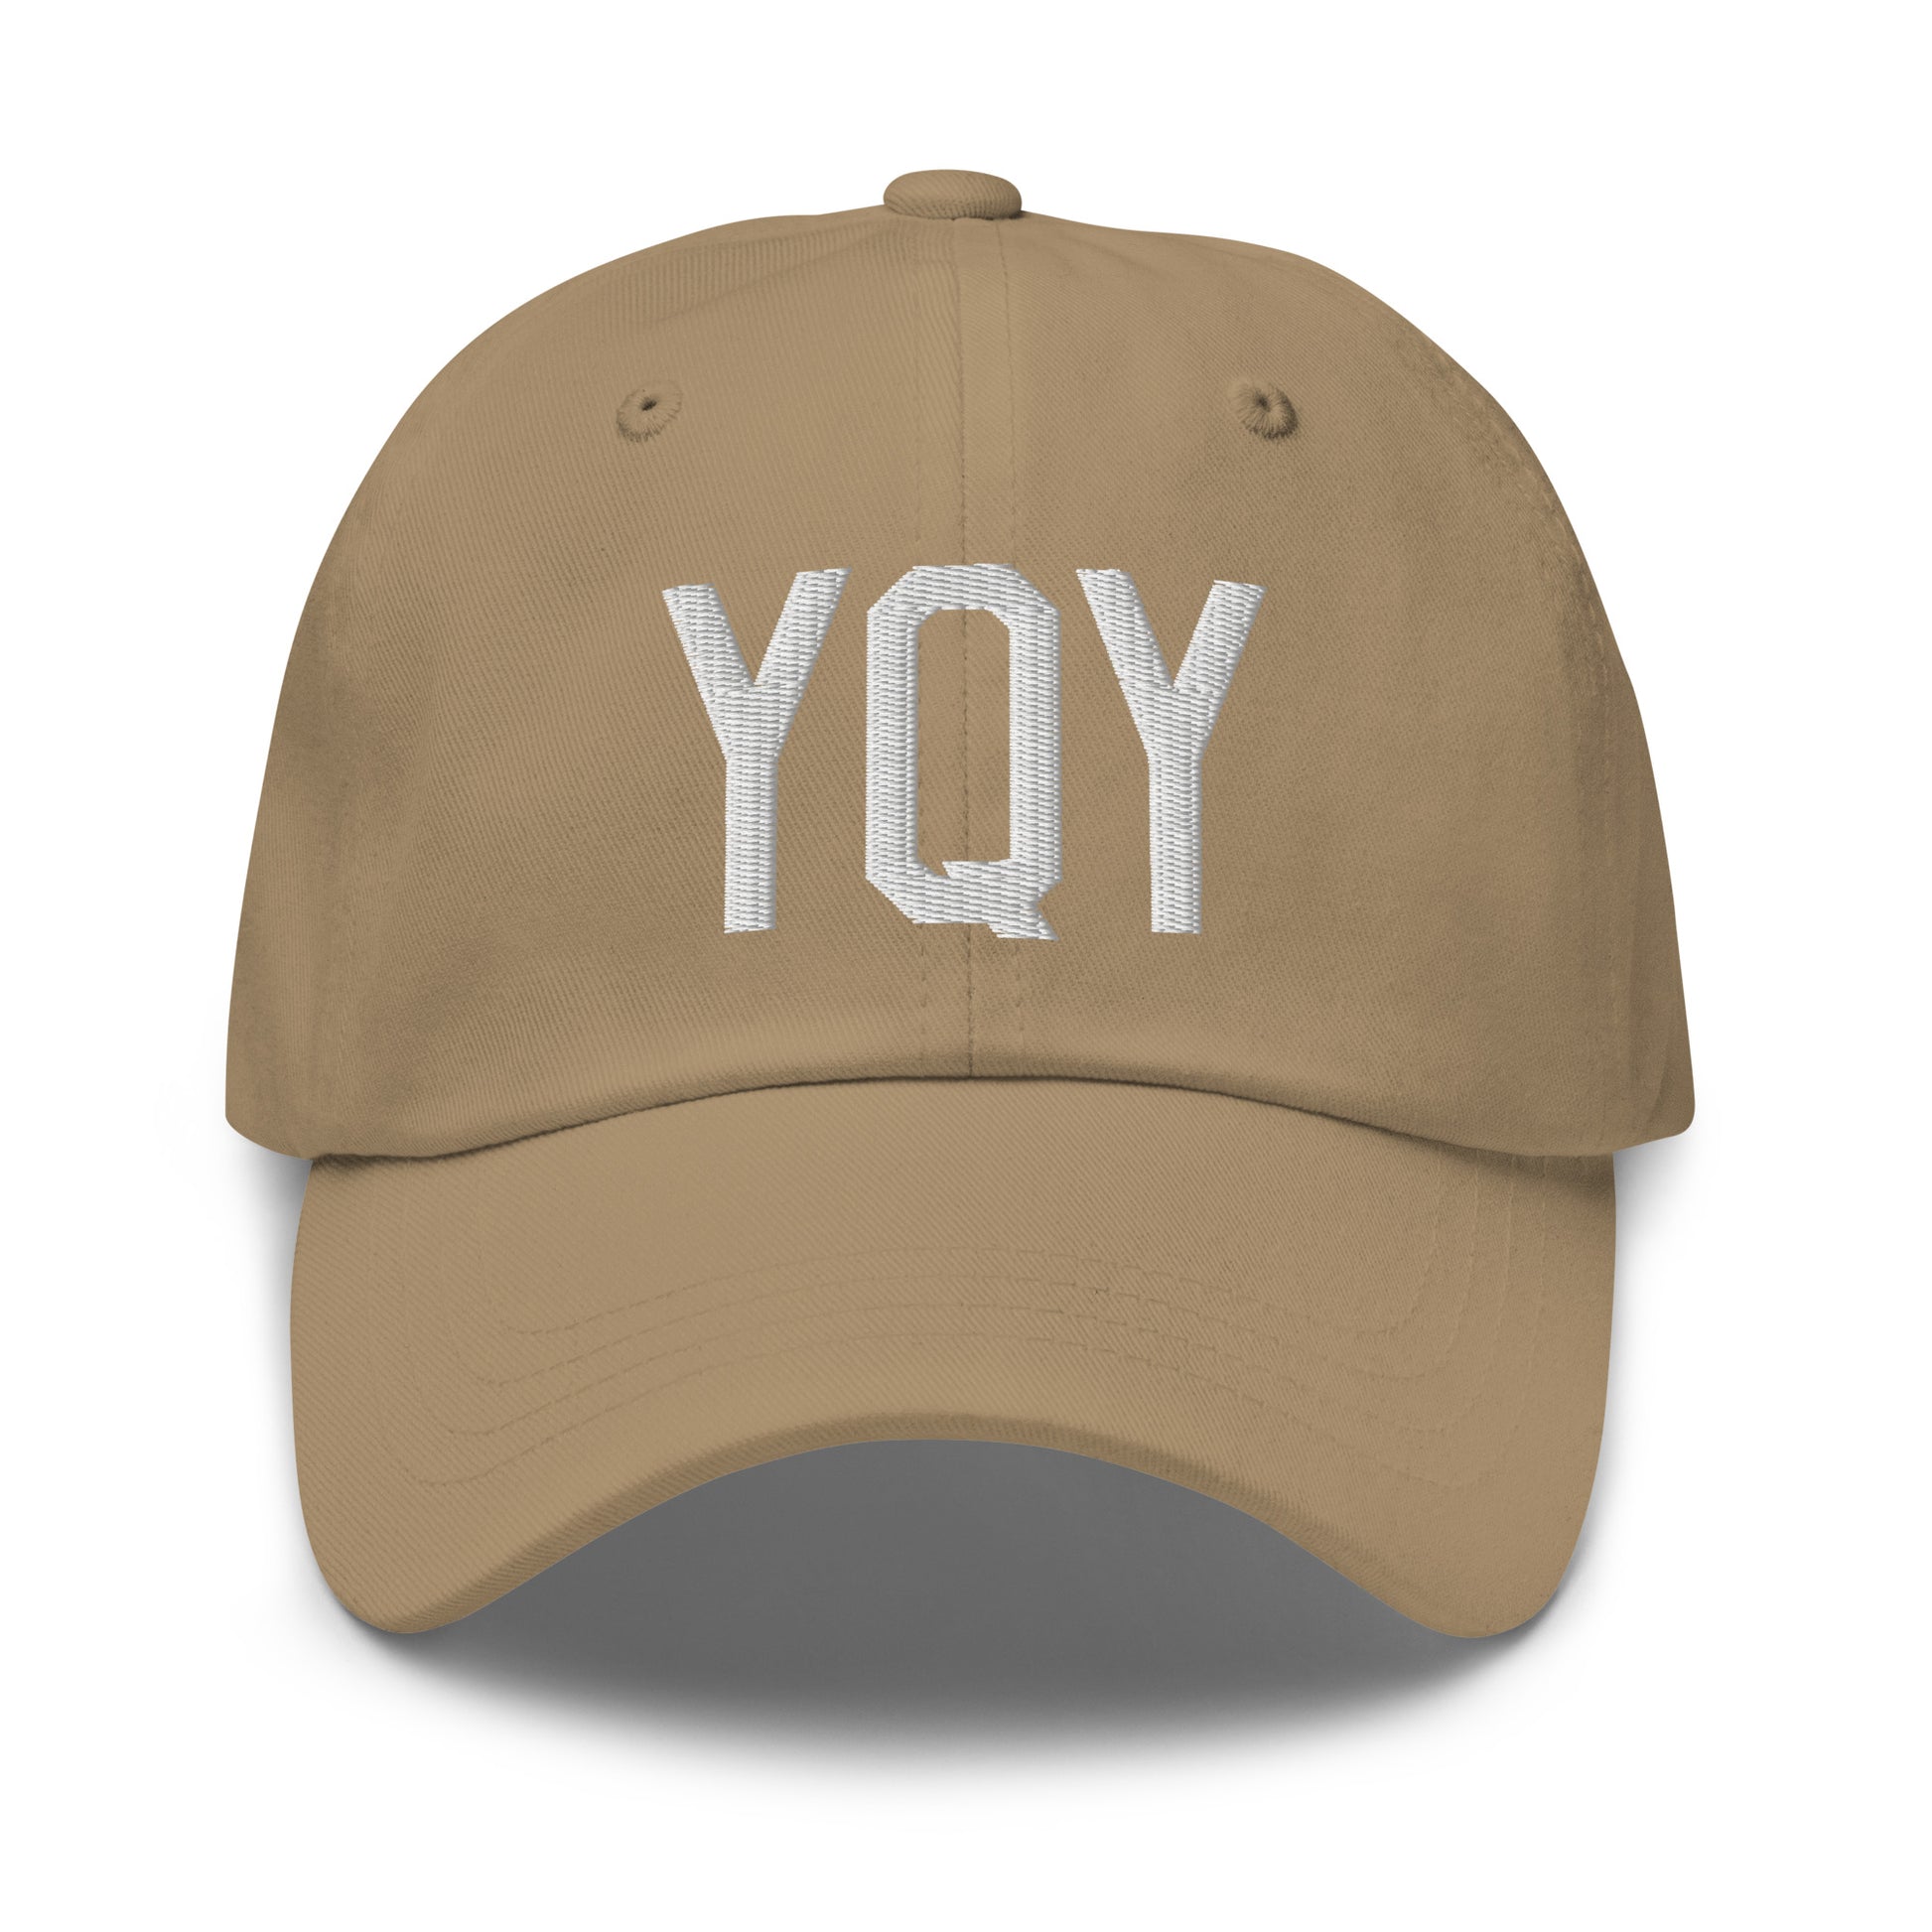 Airport Code Baseball Cap - White • YQY Sydney • YHM Designs - Image 22